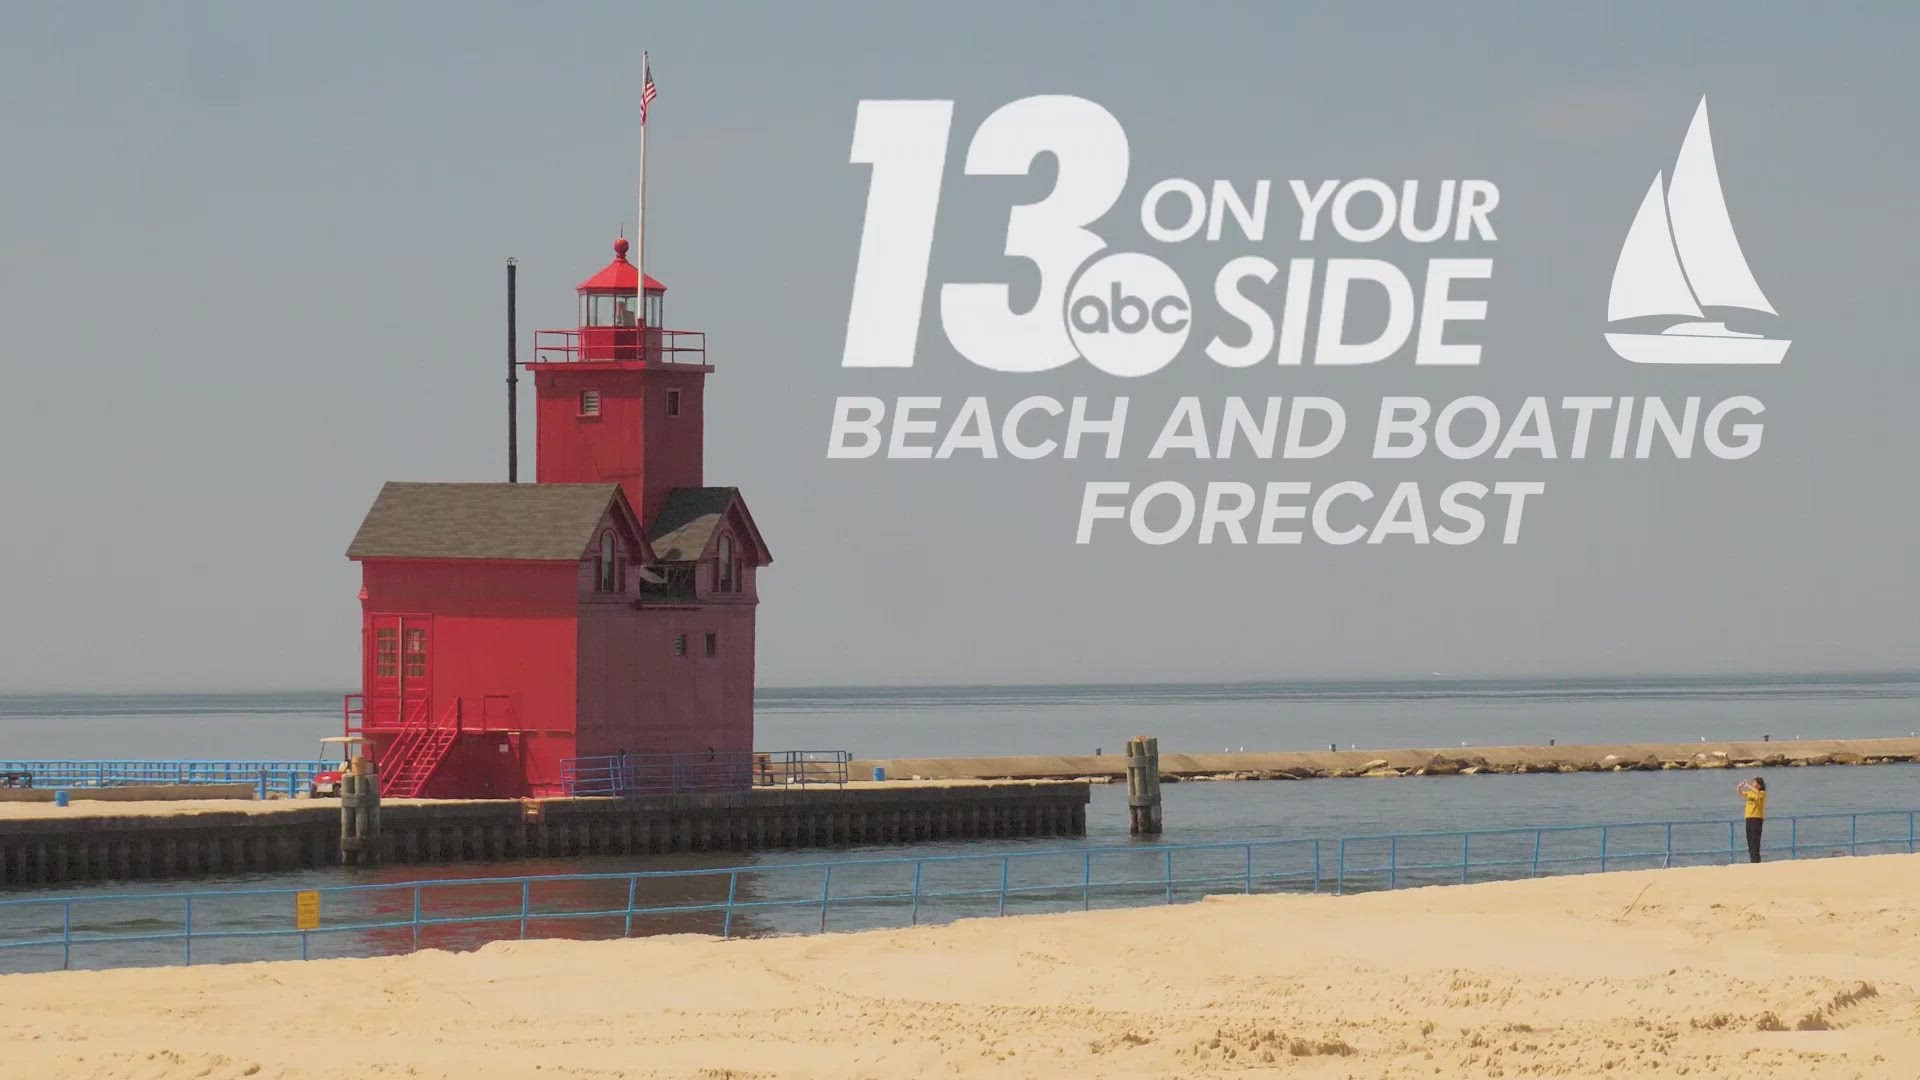 Check out the latest beach and boating forecast before heading out to Lake Michigan!